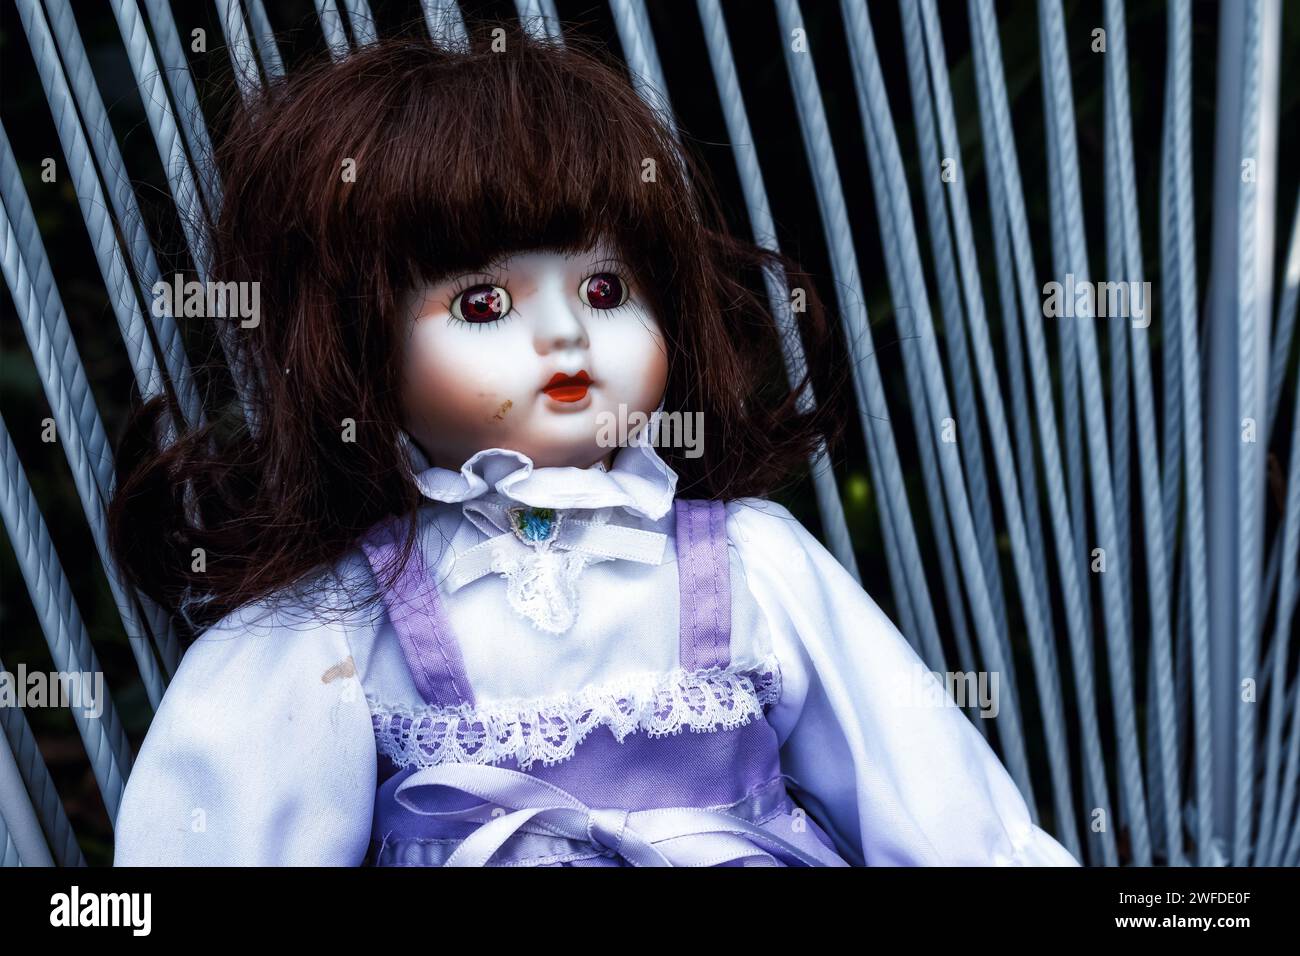 Classic Vintage toy doll with purple dress and ruffle blouse in a dark moody tone Stock Photo